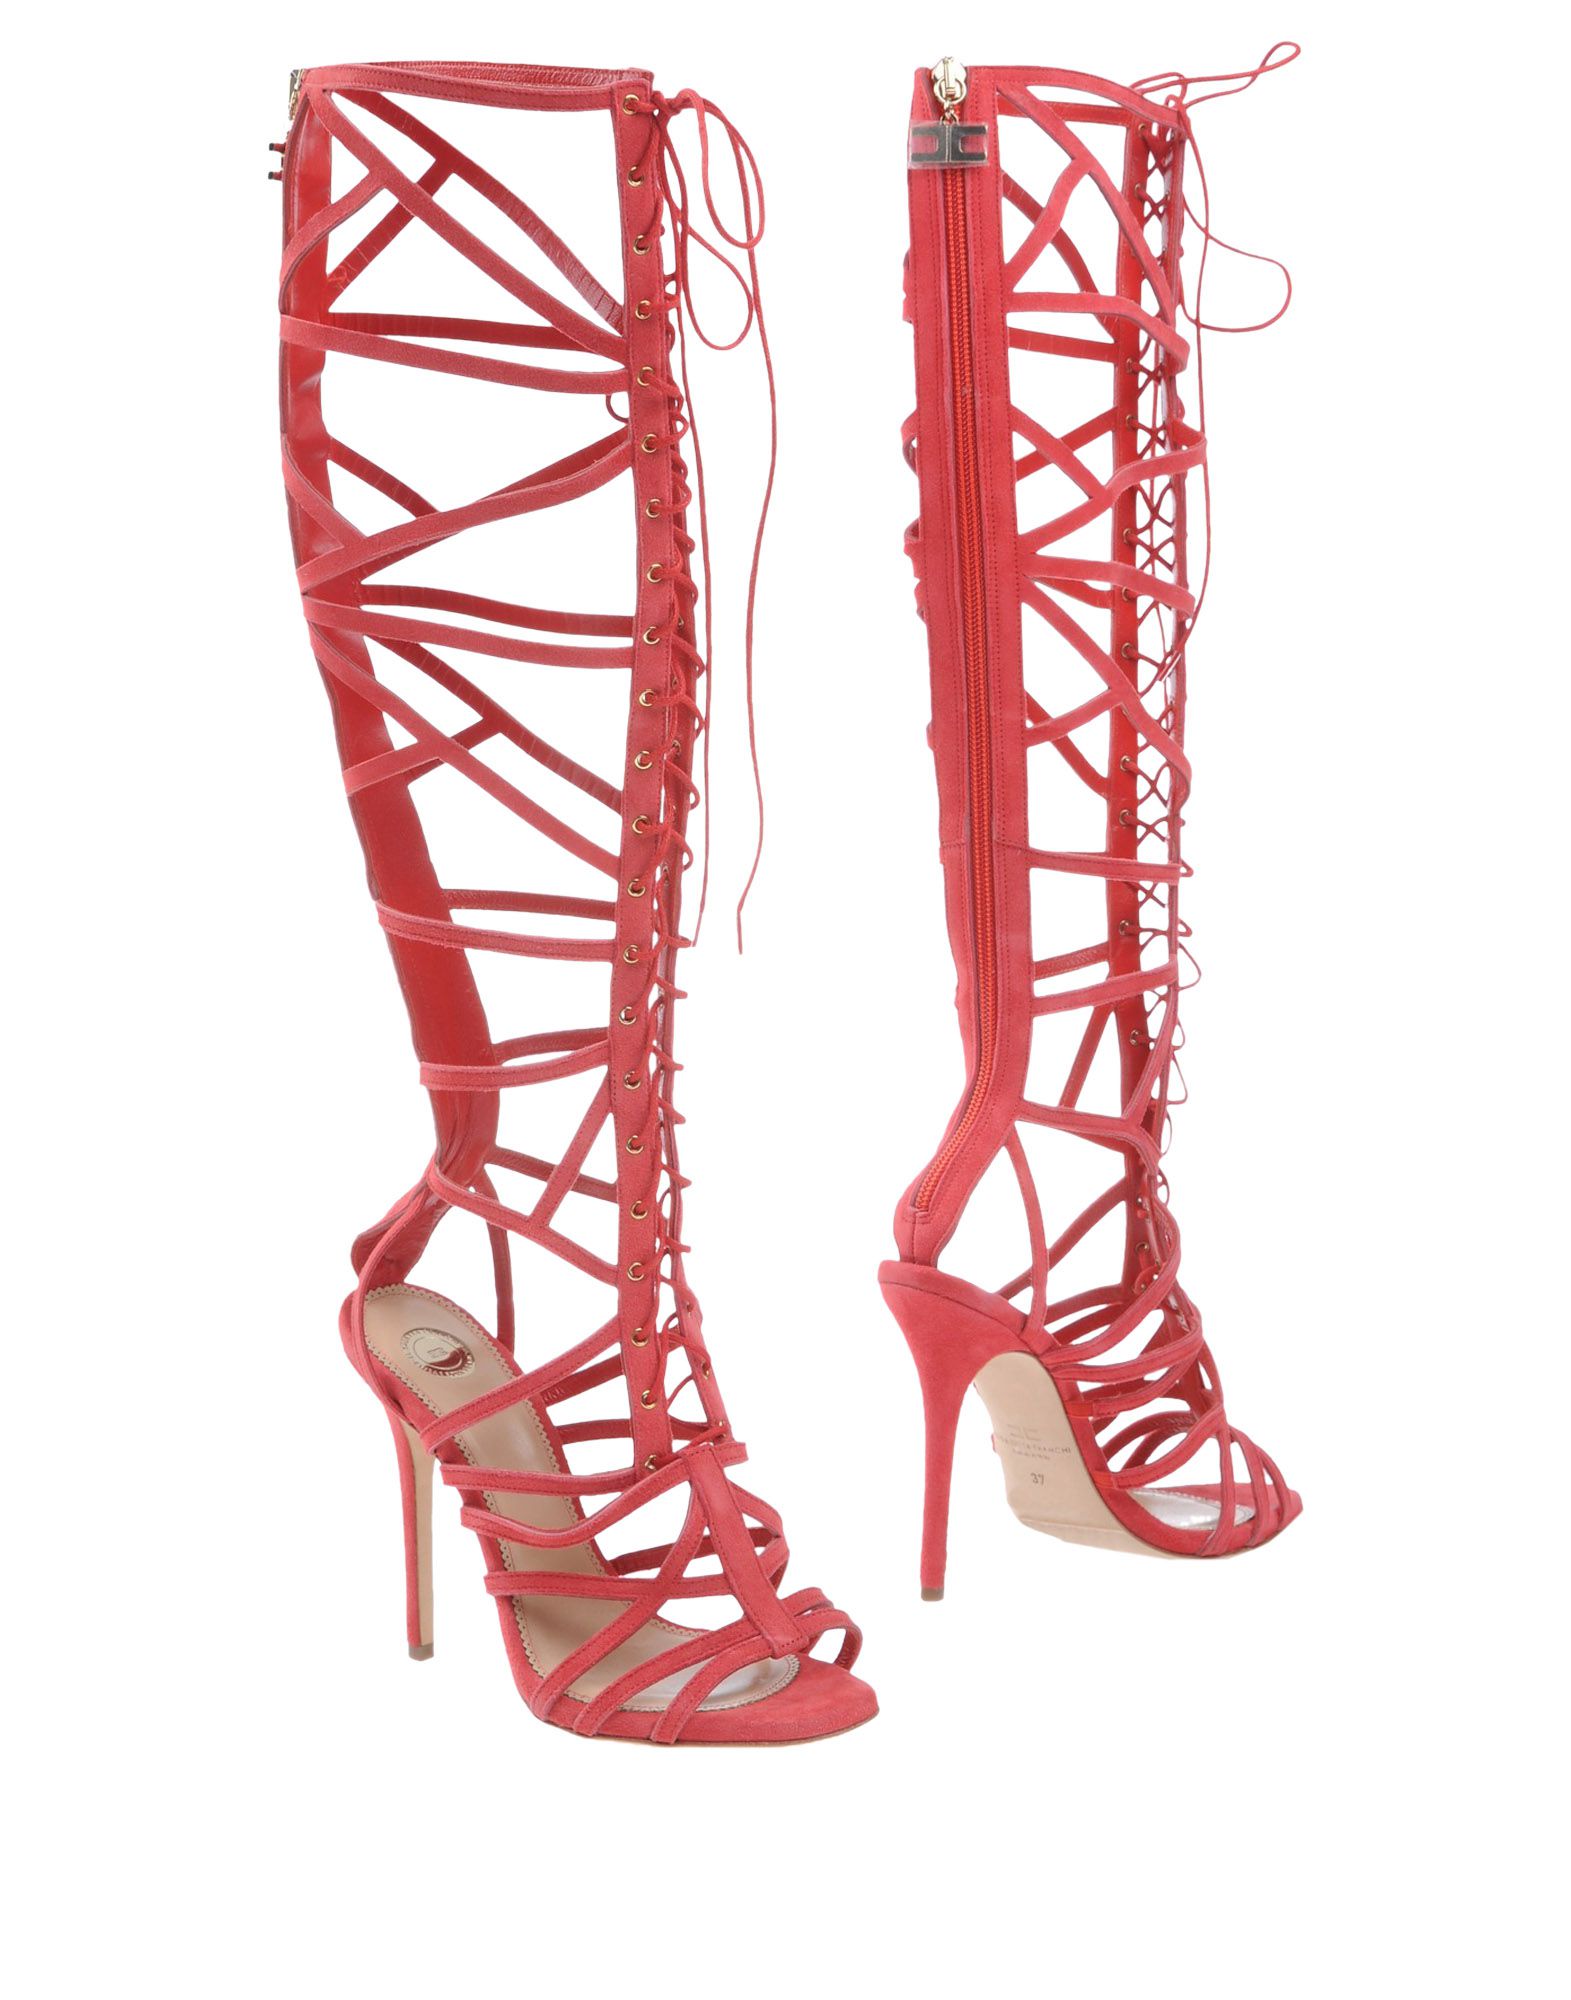 Elisabetta Franchi Knee Boots In Coral